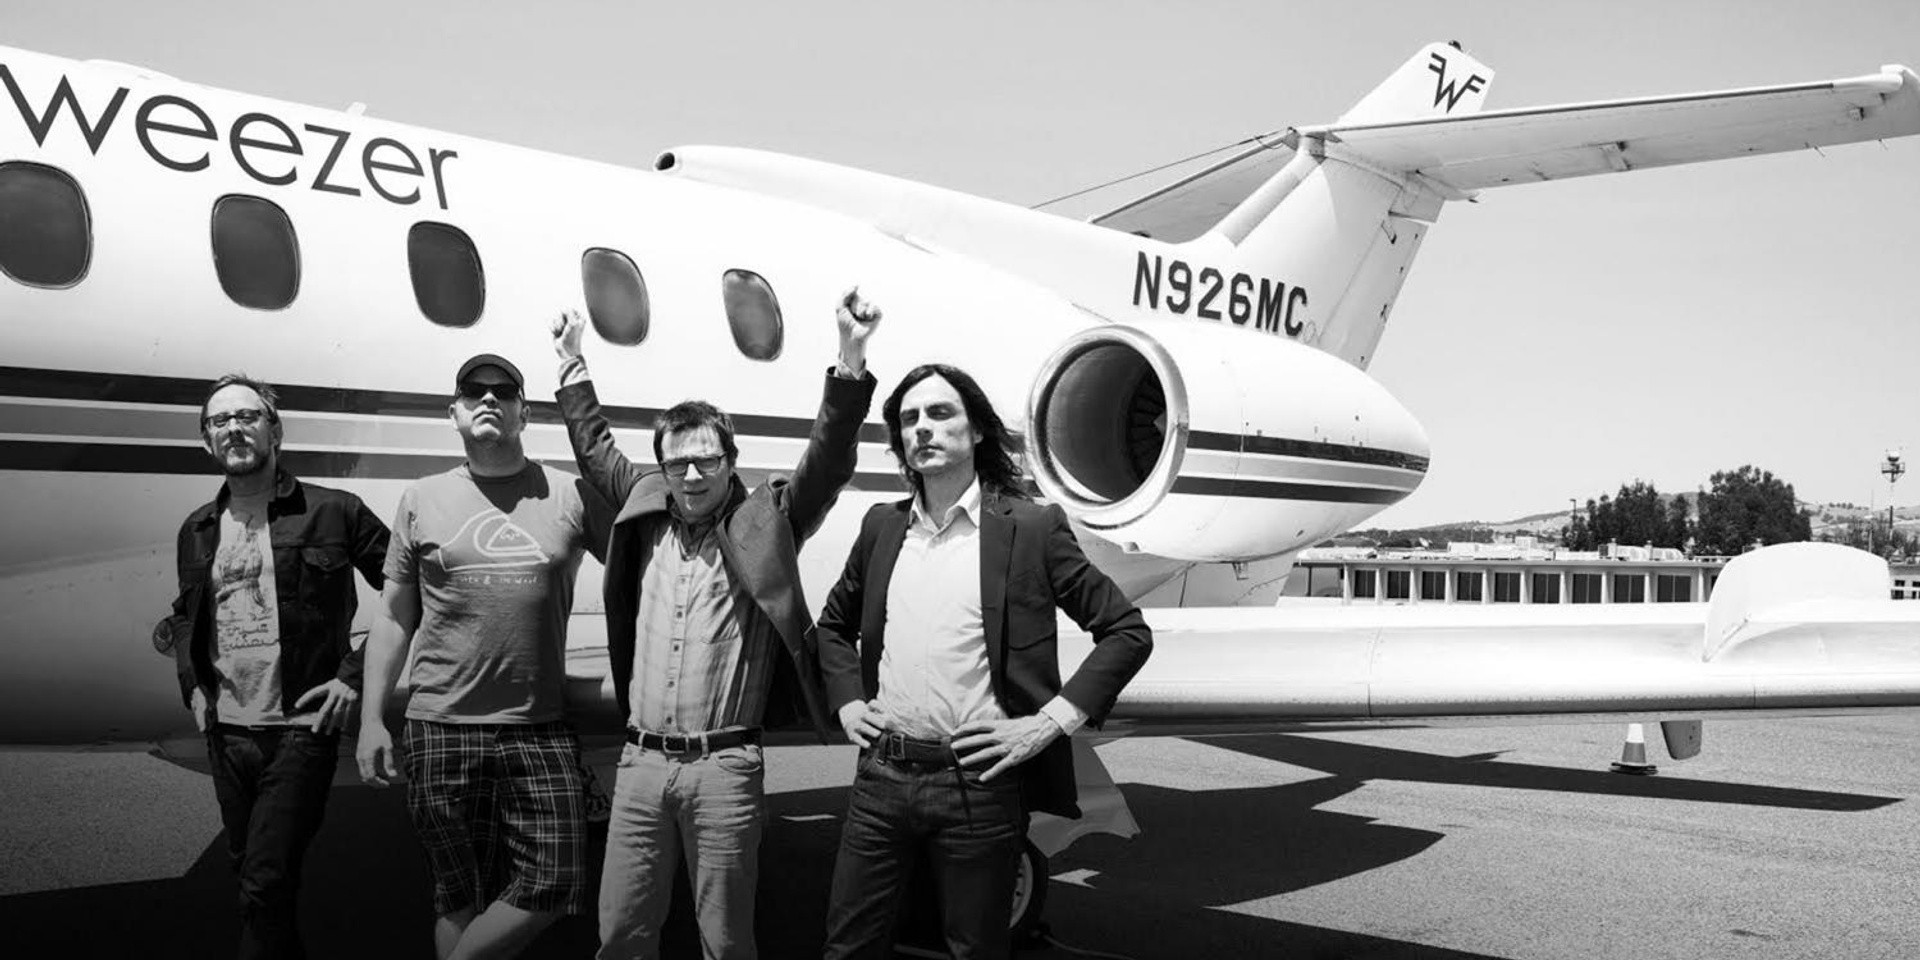 You could meet Weezer when they're in Singapore